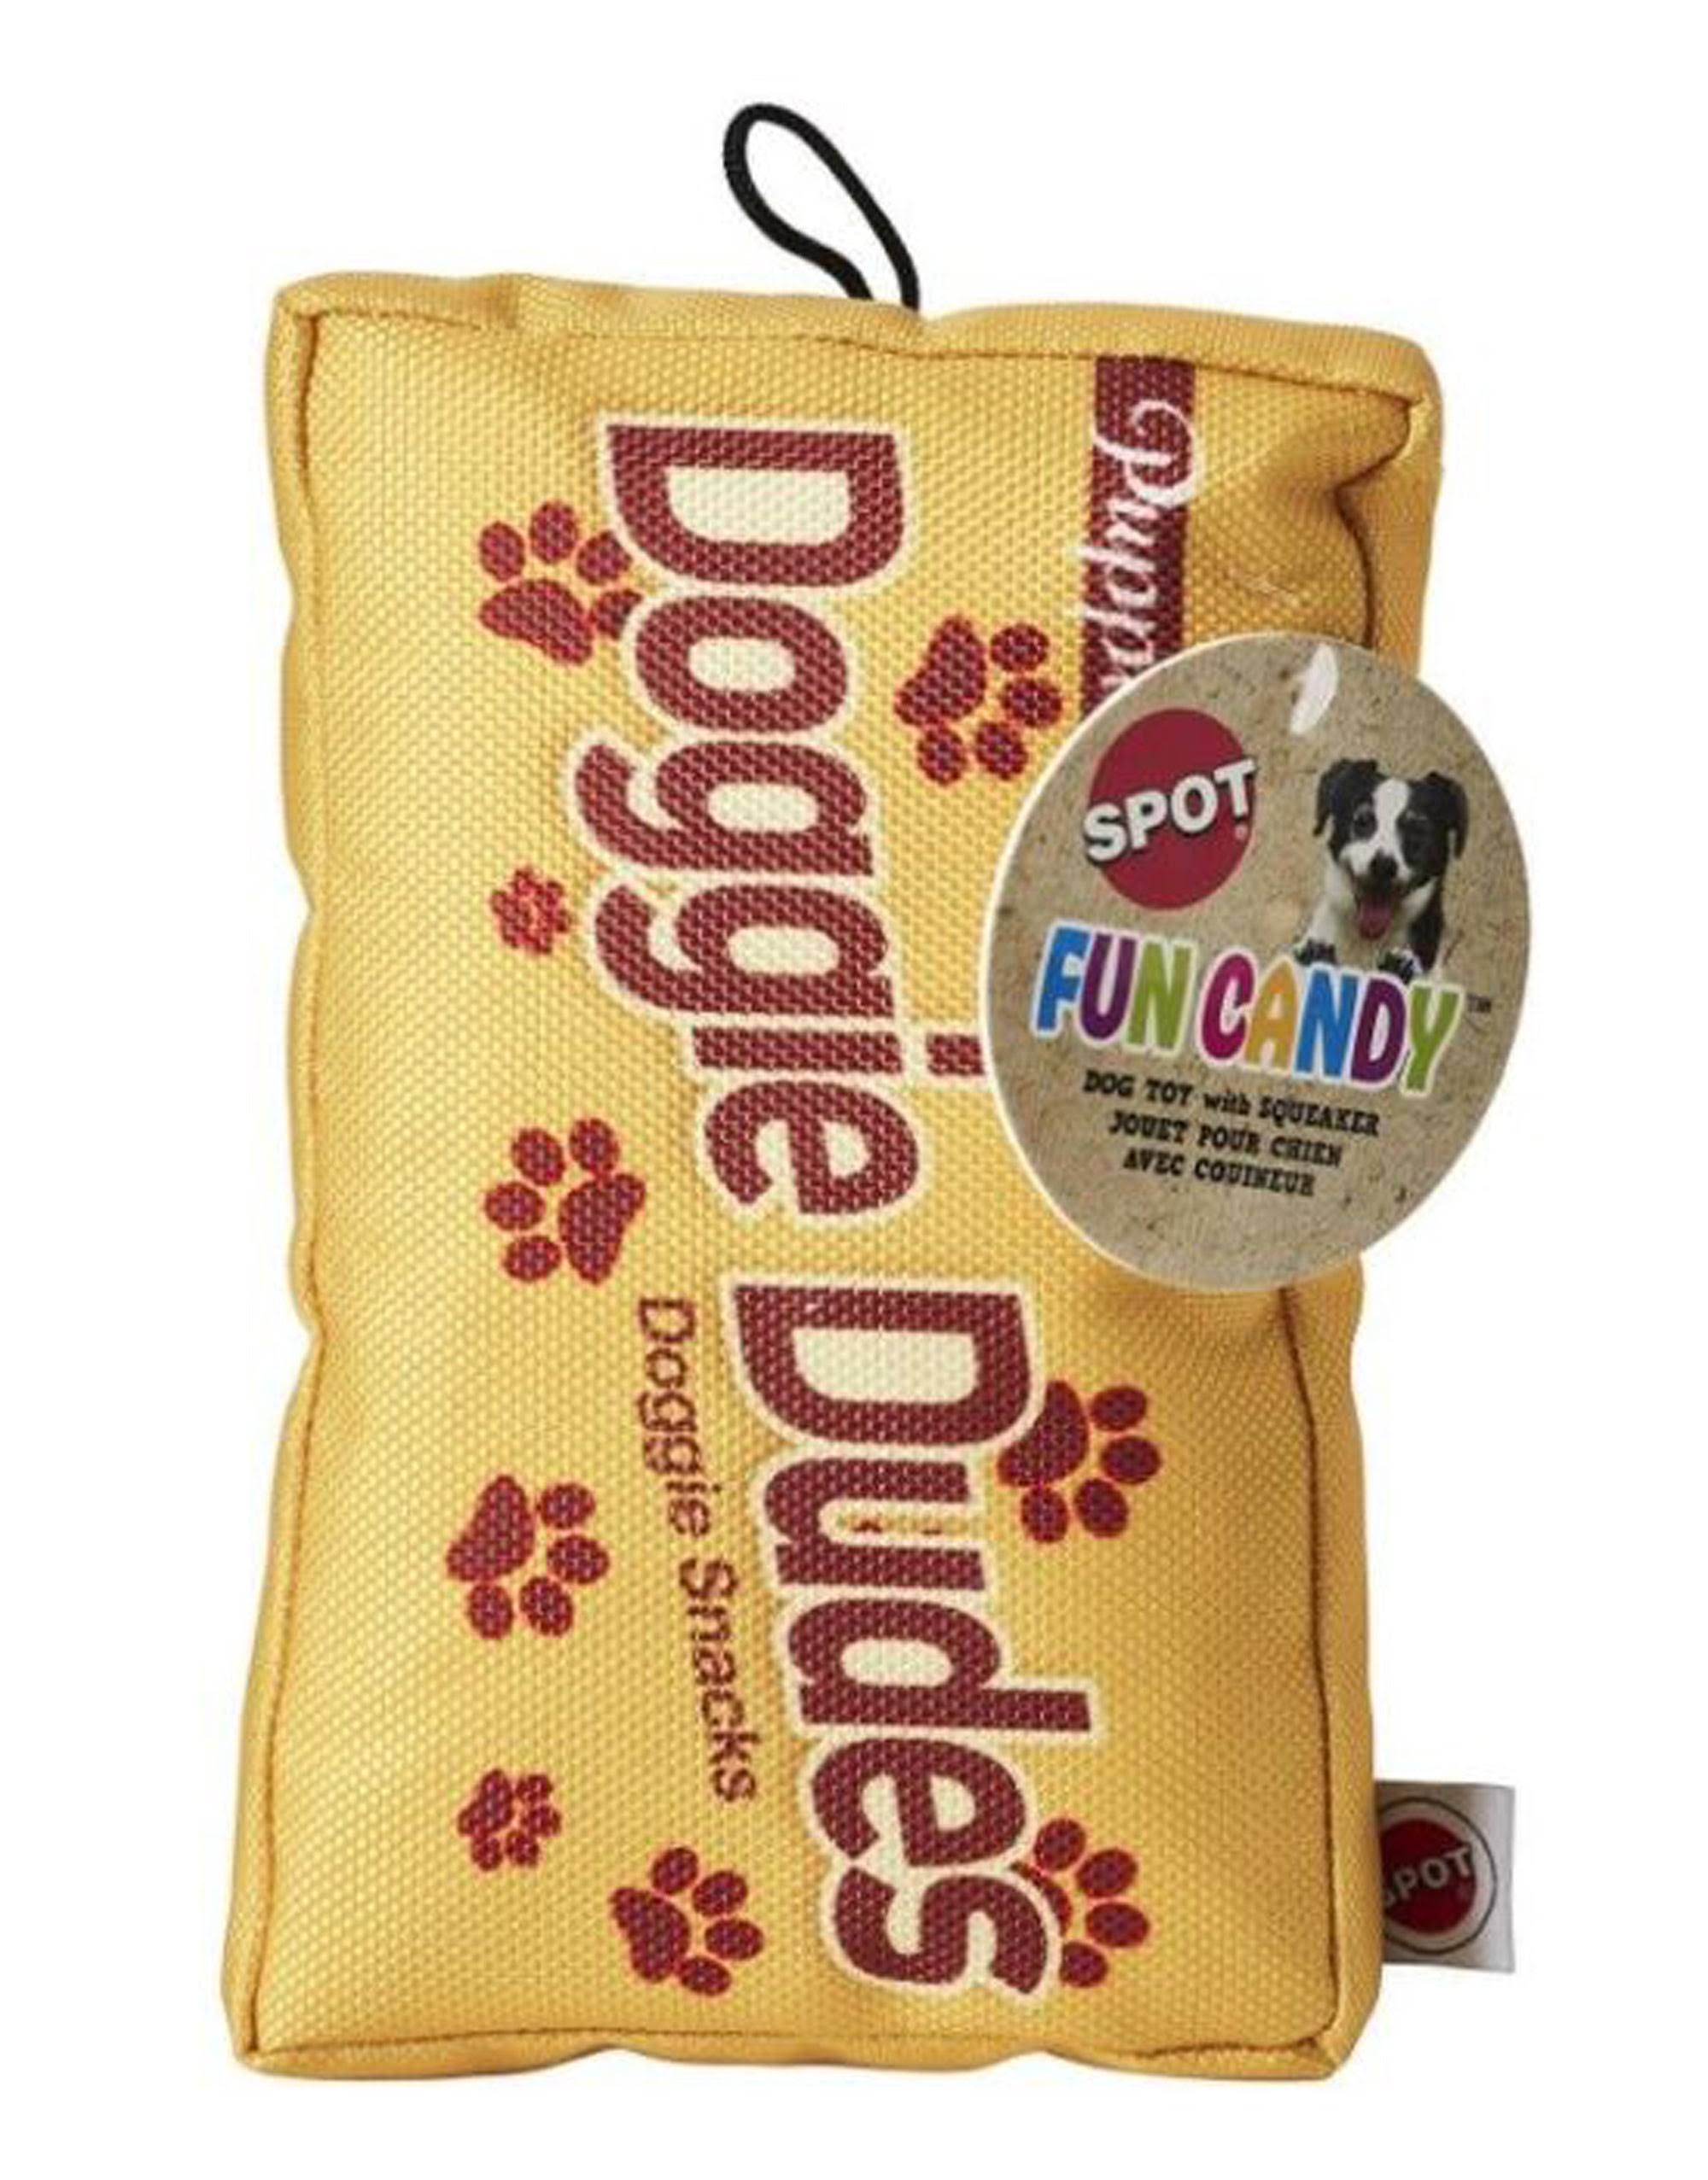 Spot Fun Candy Doggie Dudes Plush Dog Toy, 1 count (Pack of 1)